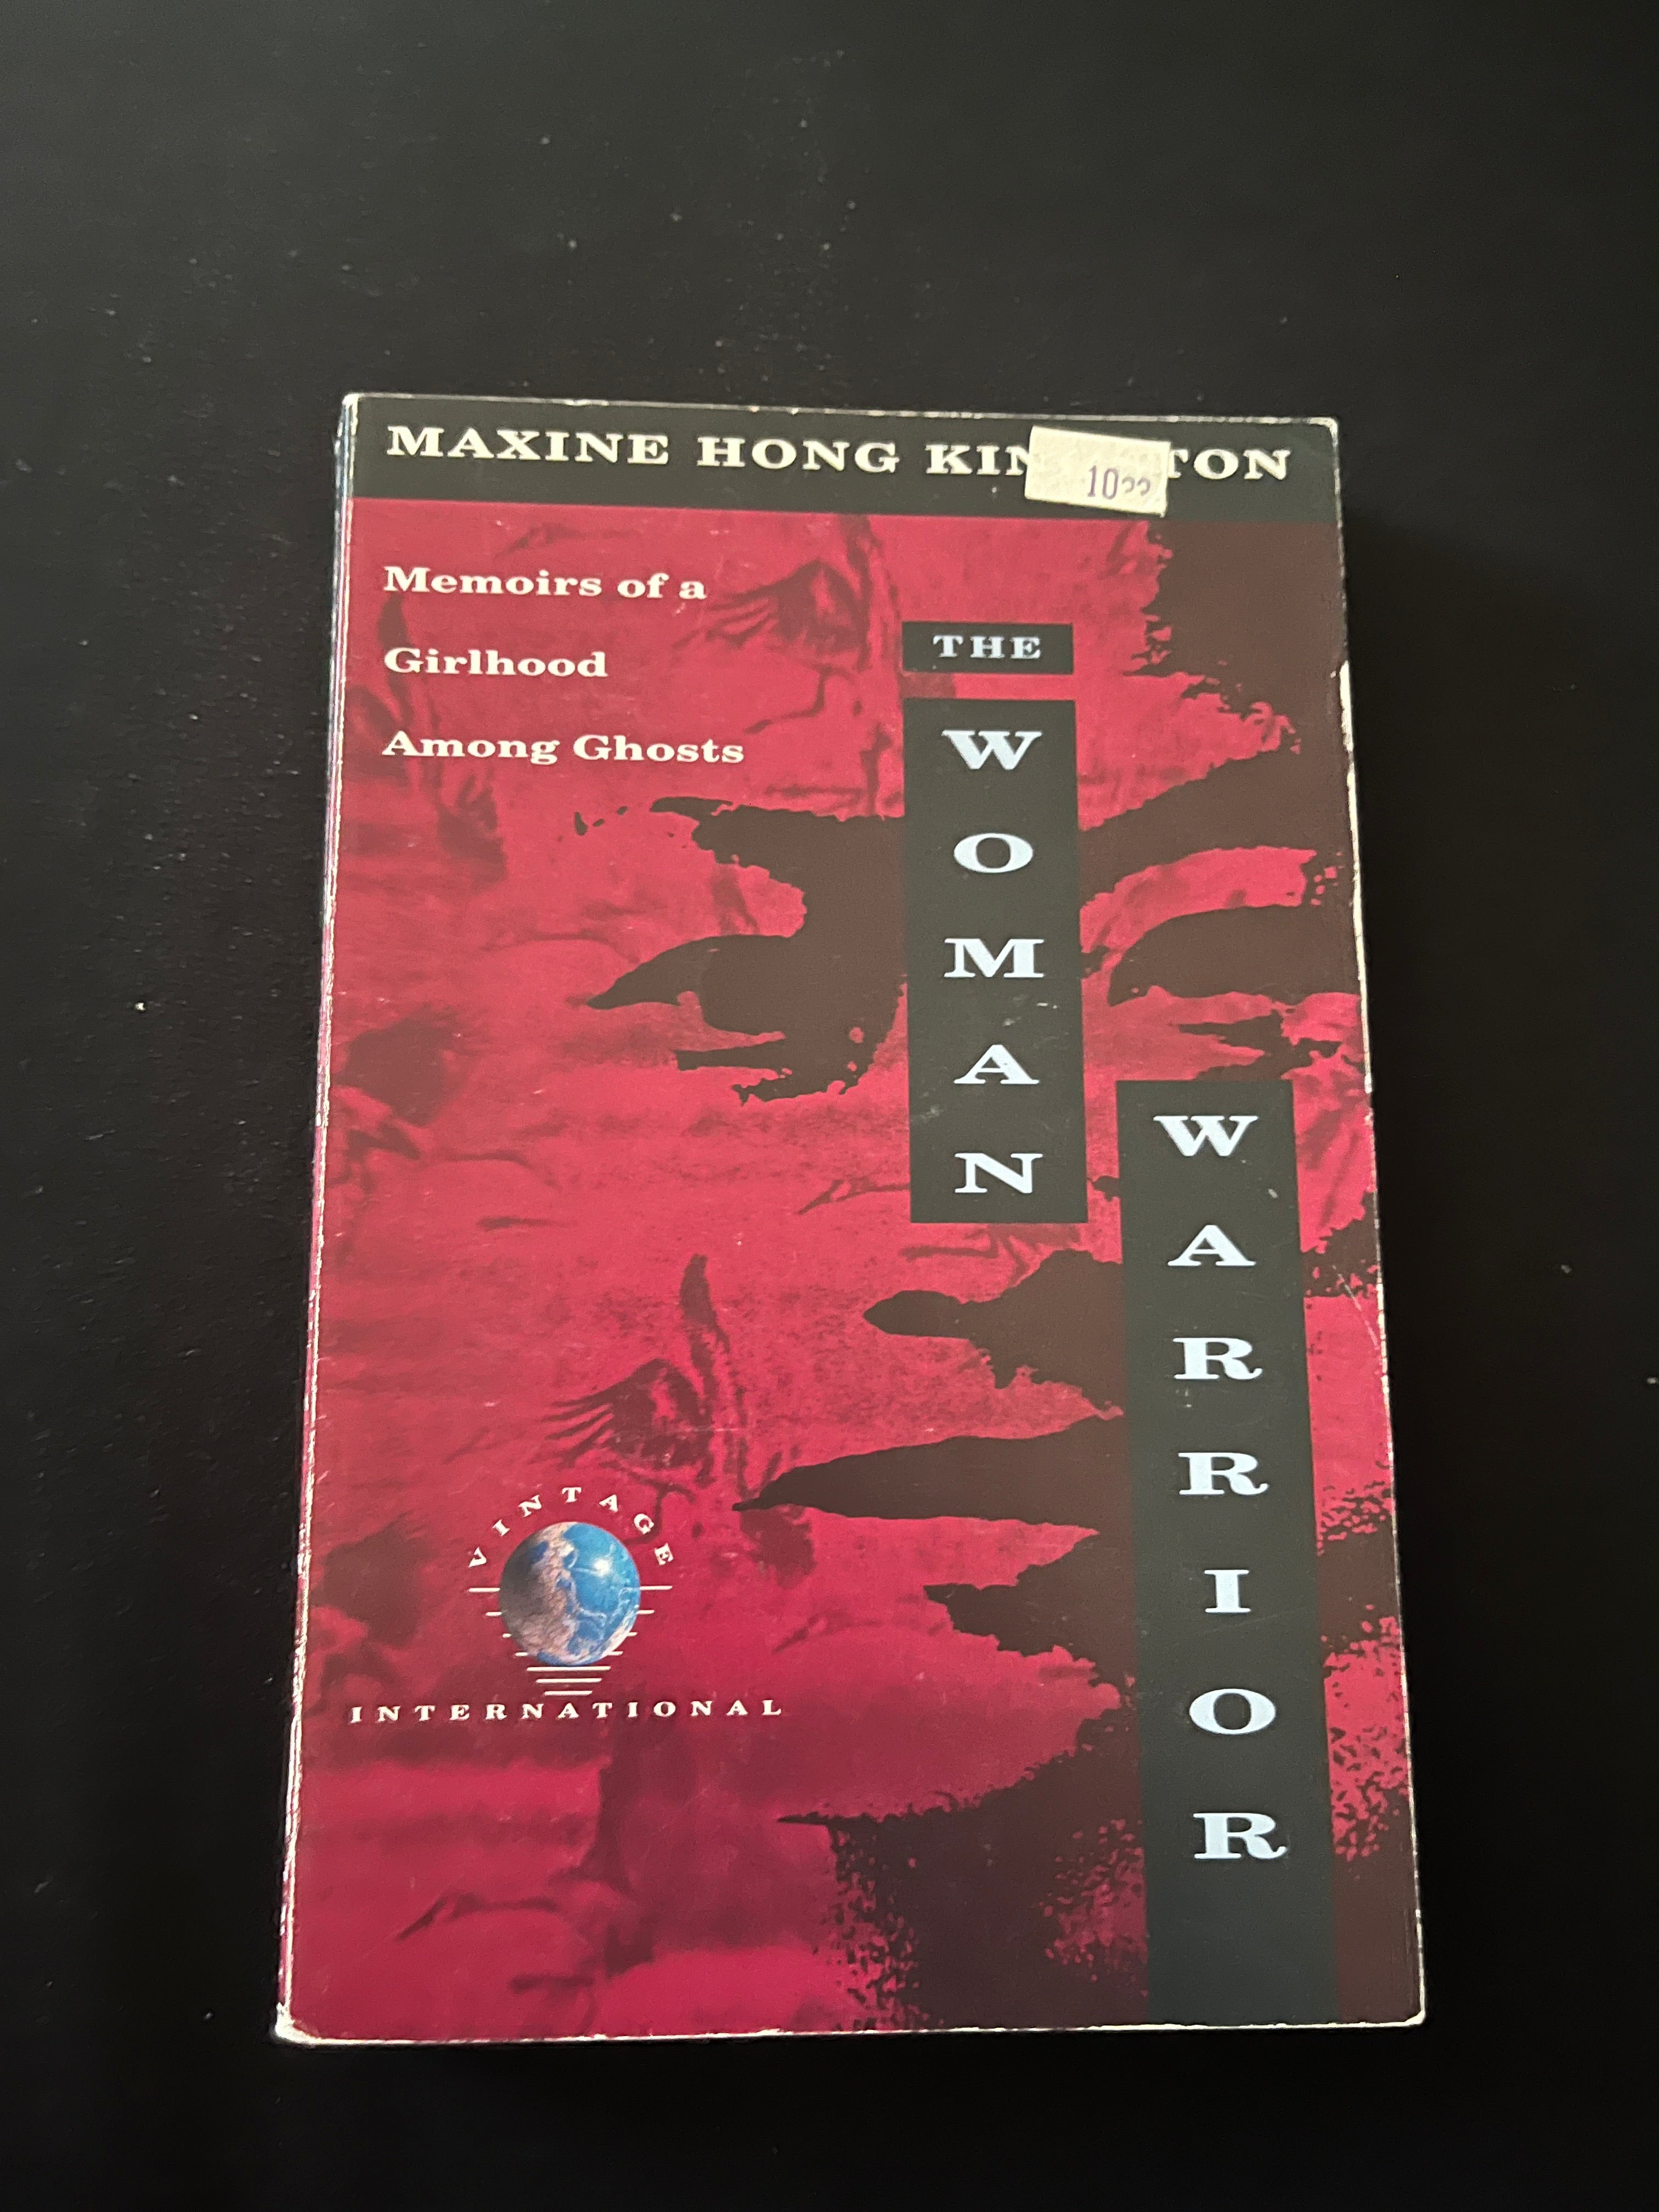 by　–　Maxine　is　Hong　THE　WARRIOR　Liberation　WOMAN　Kingston　Lit